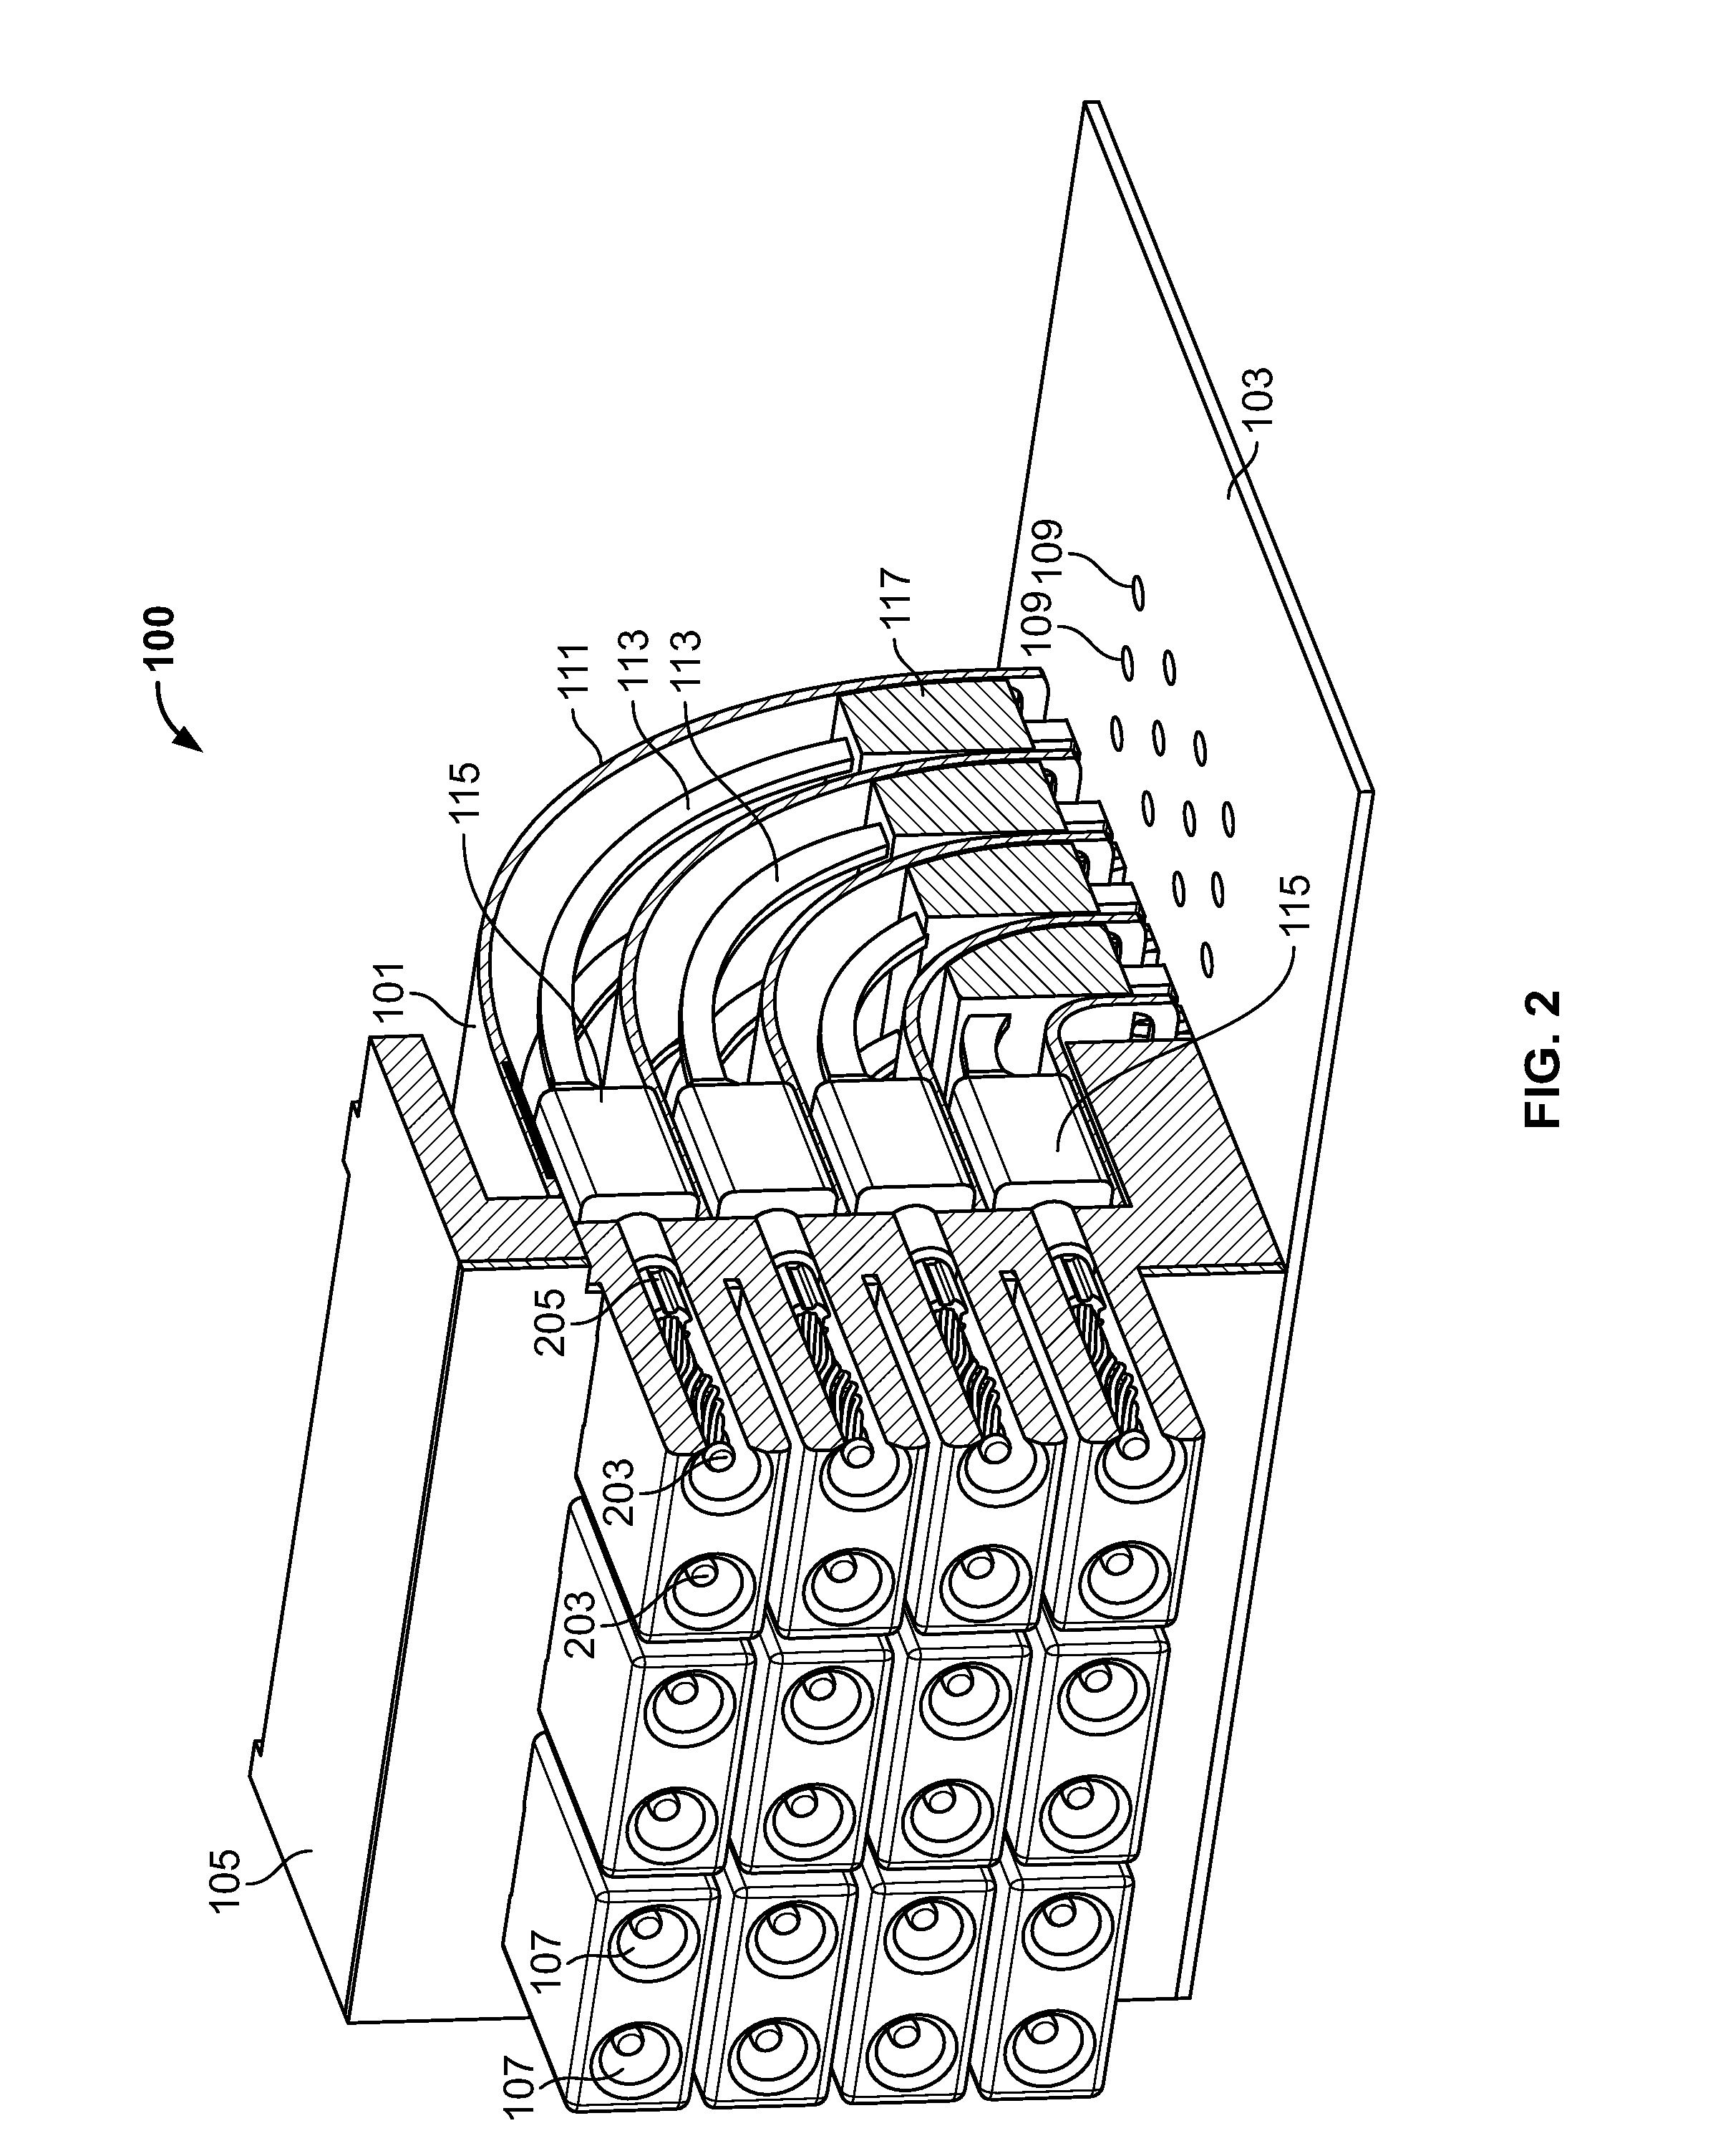 High-speed backplane connector